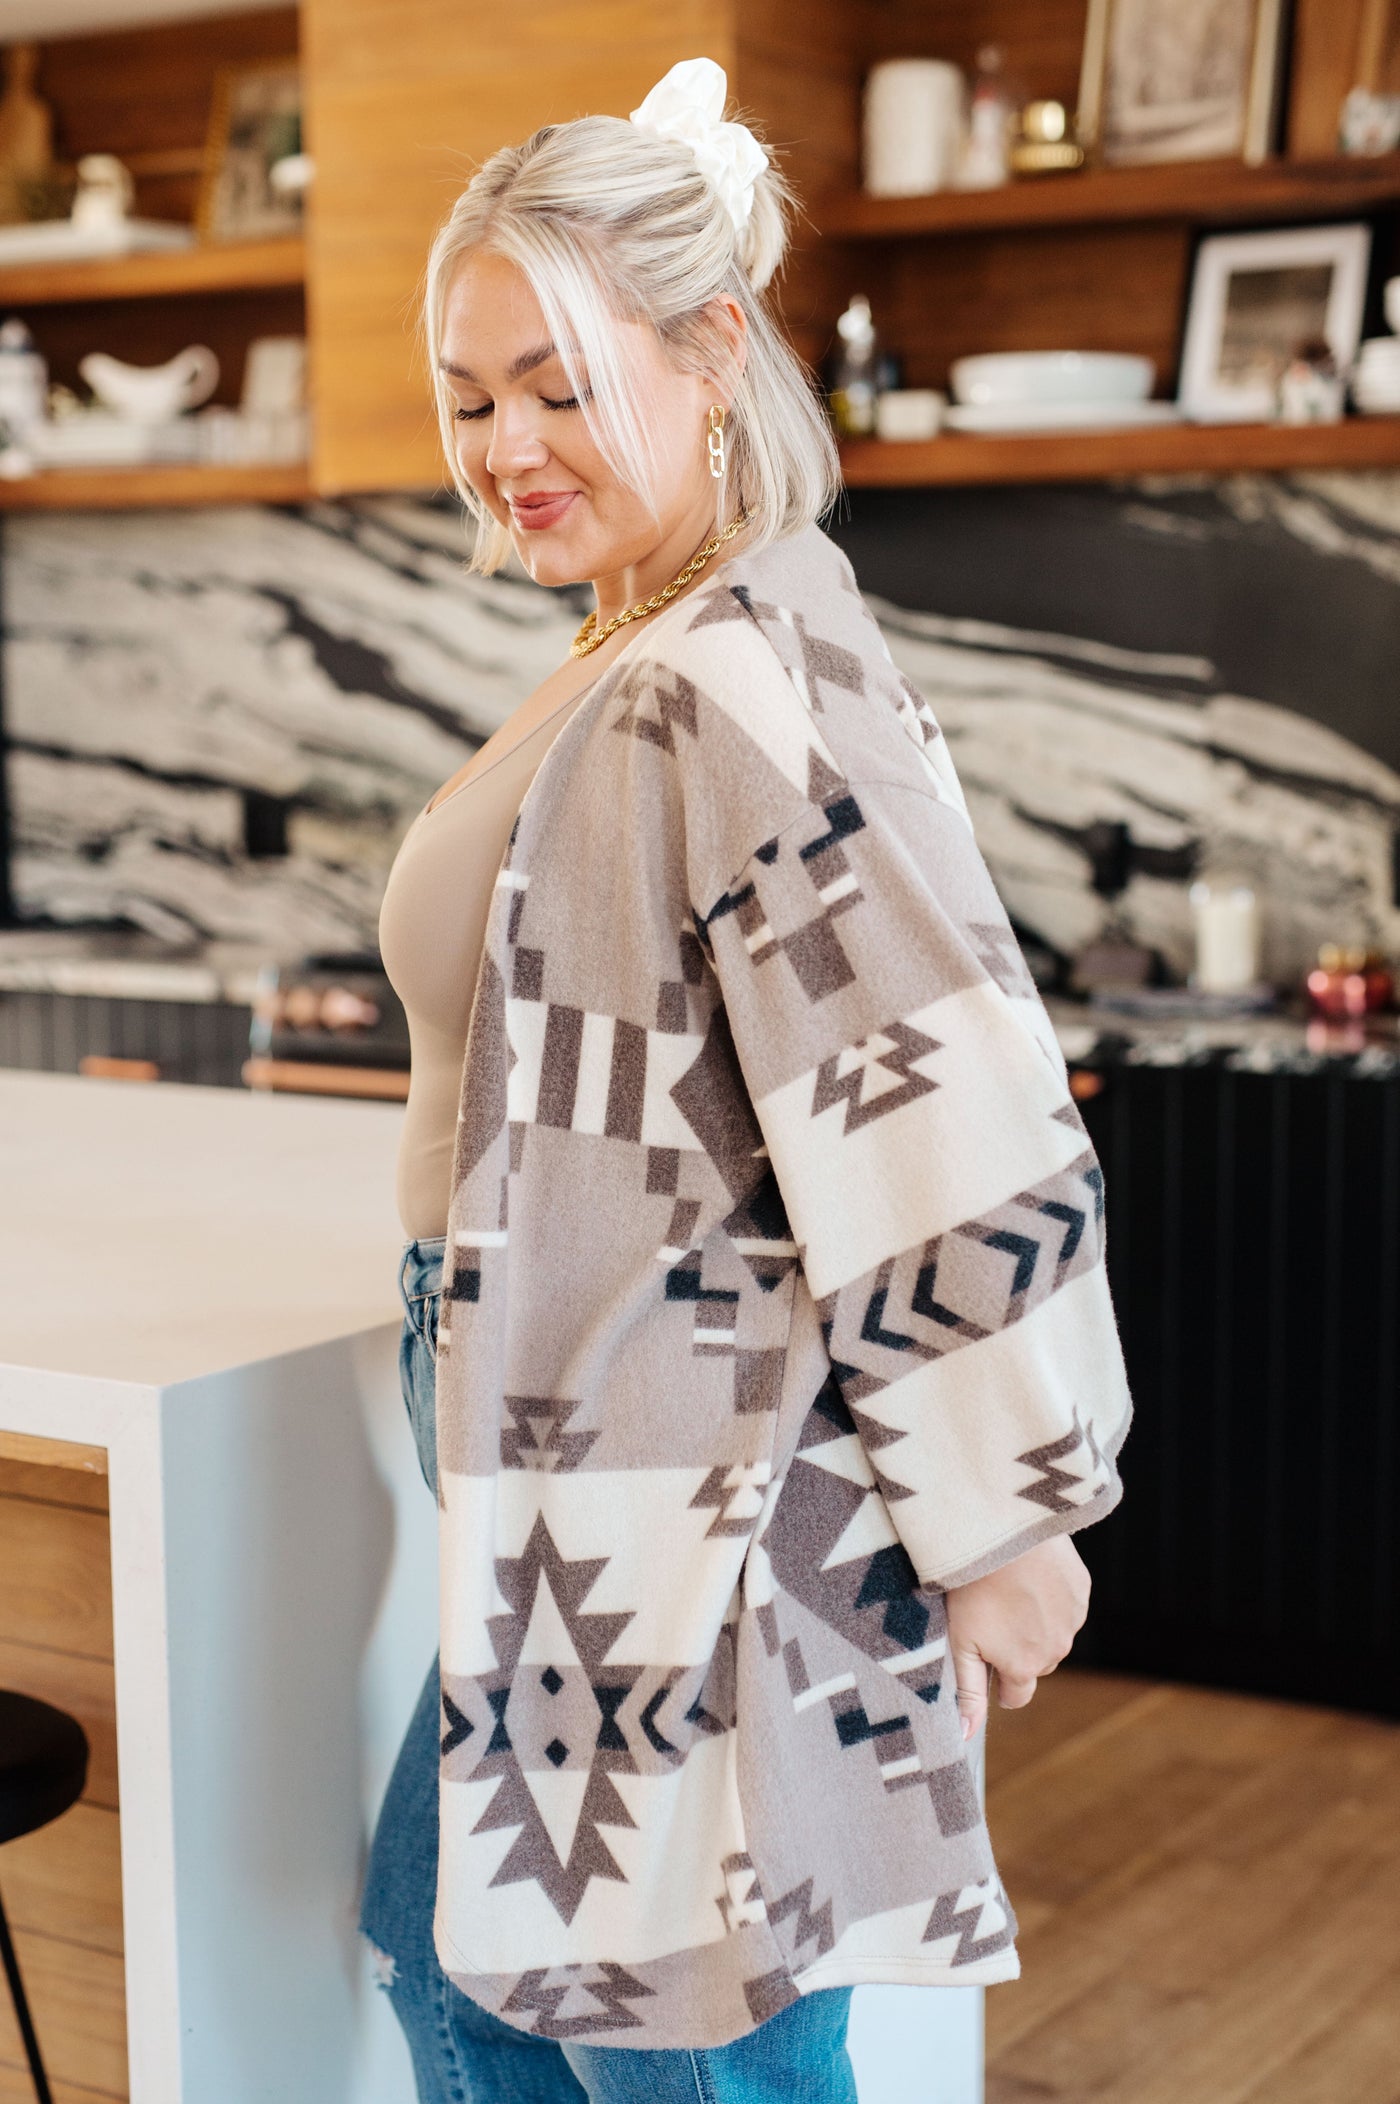 The Full of Character Blanket Kimono is perfect for cozying up on chilly nig